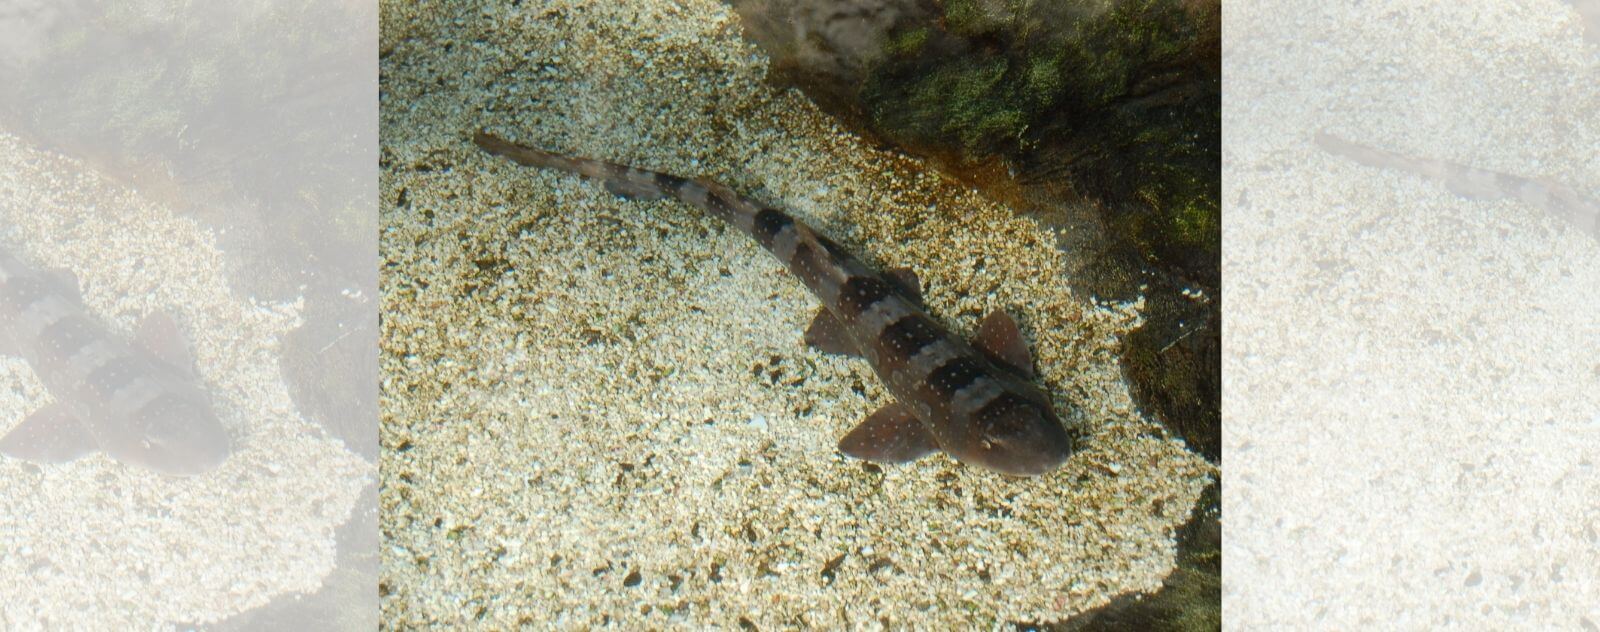 Brownbanded Bamboo Shark on the Sand at the Bottom of the Sea